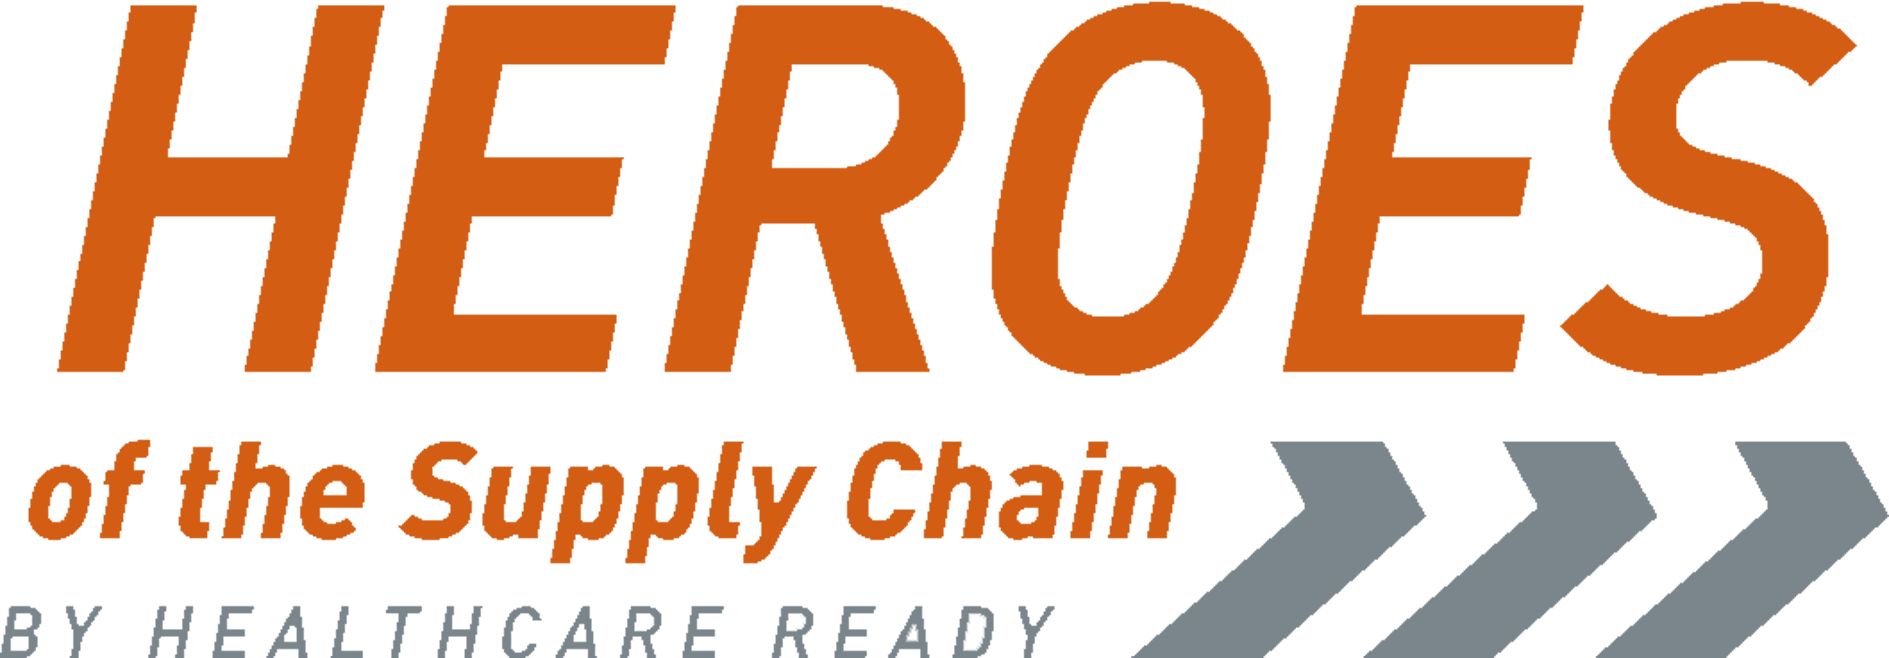 Heroes of the supply chain